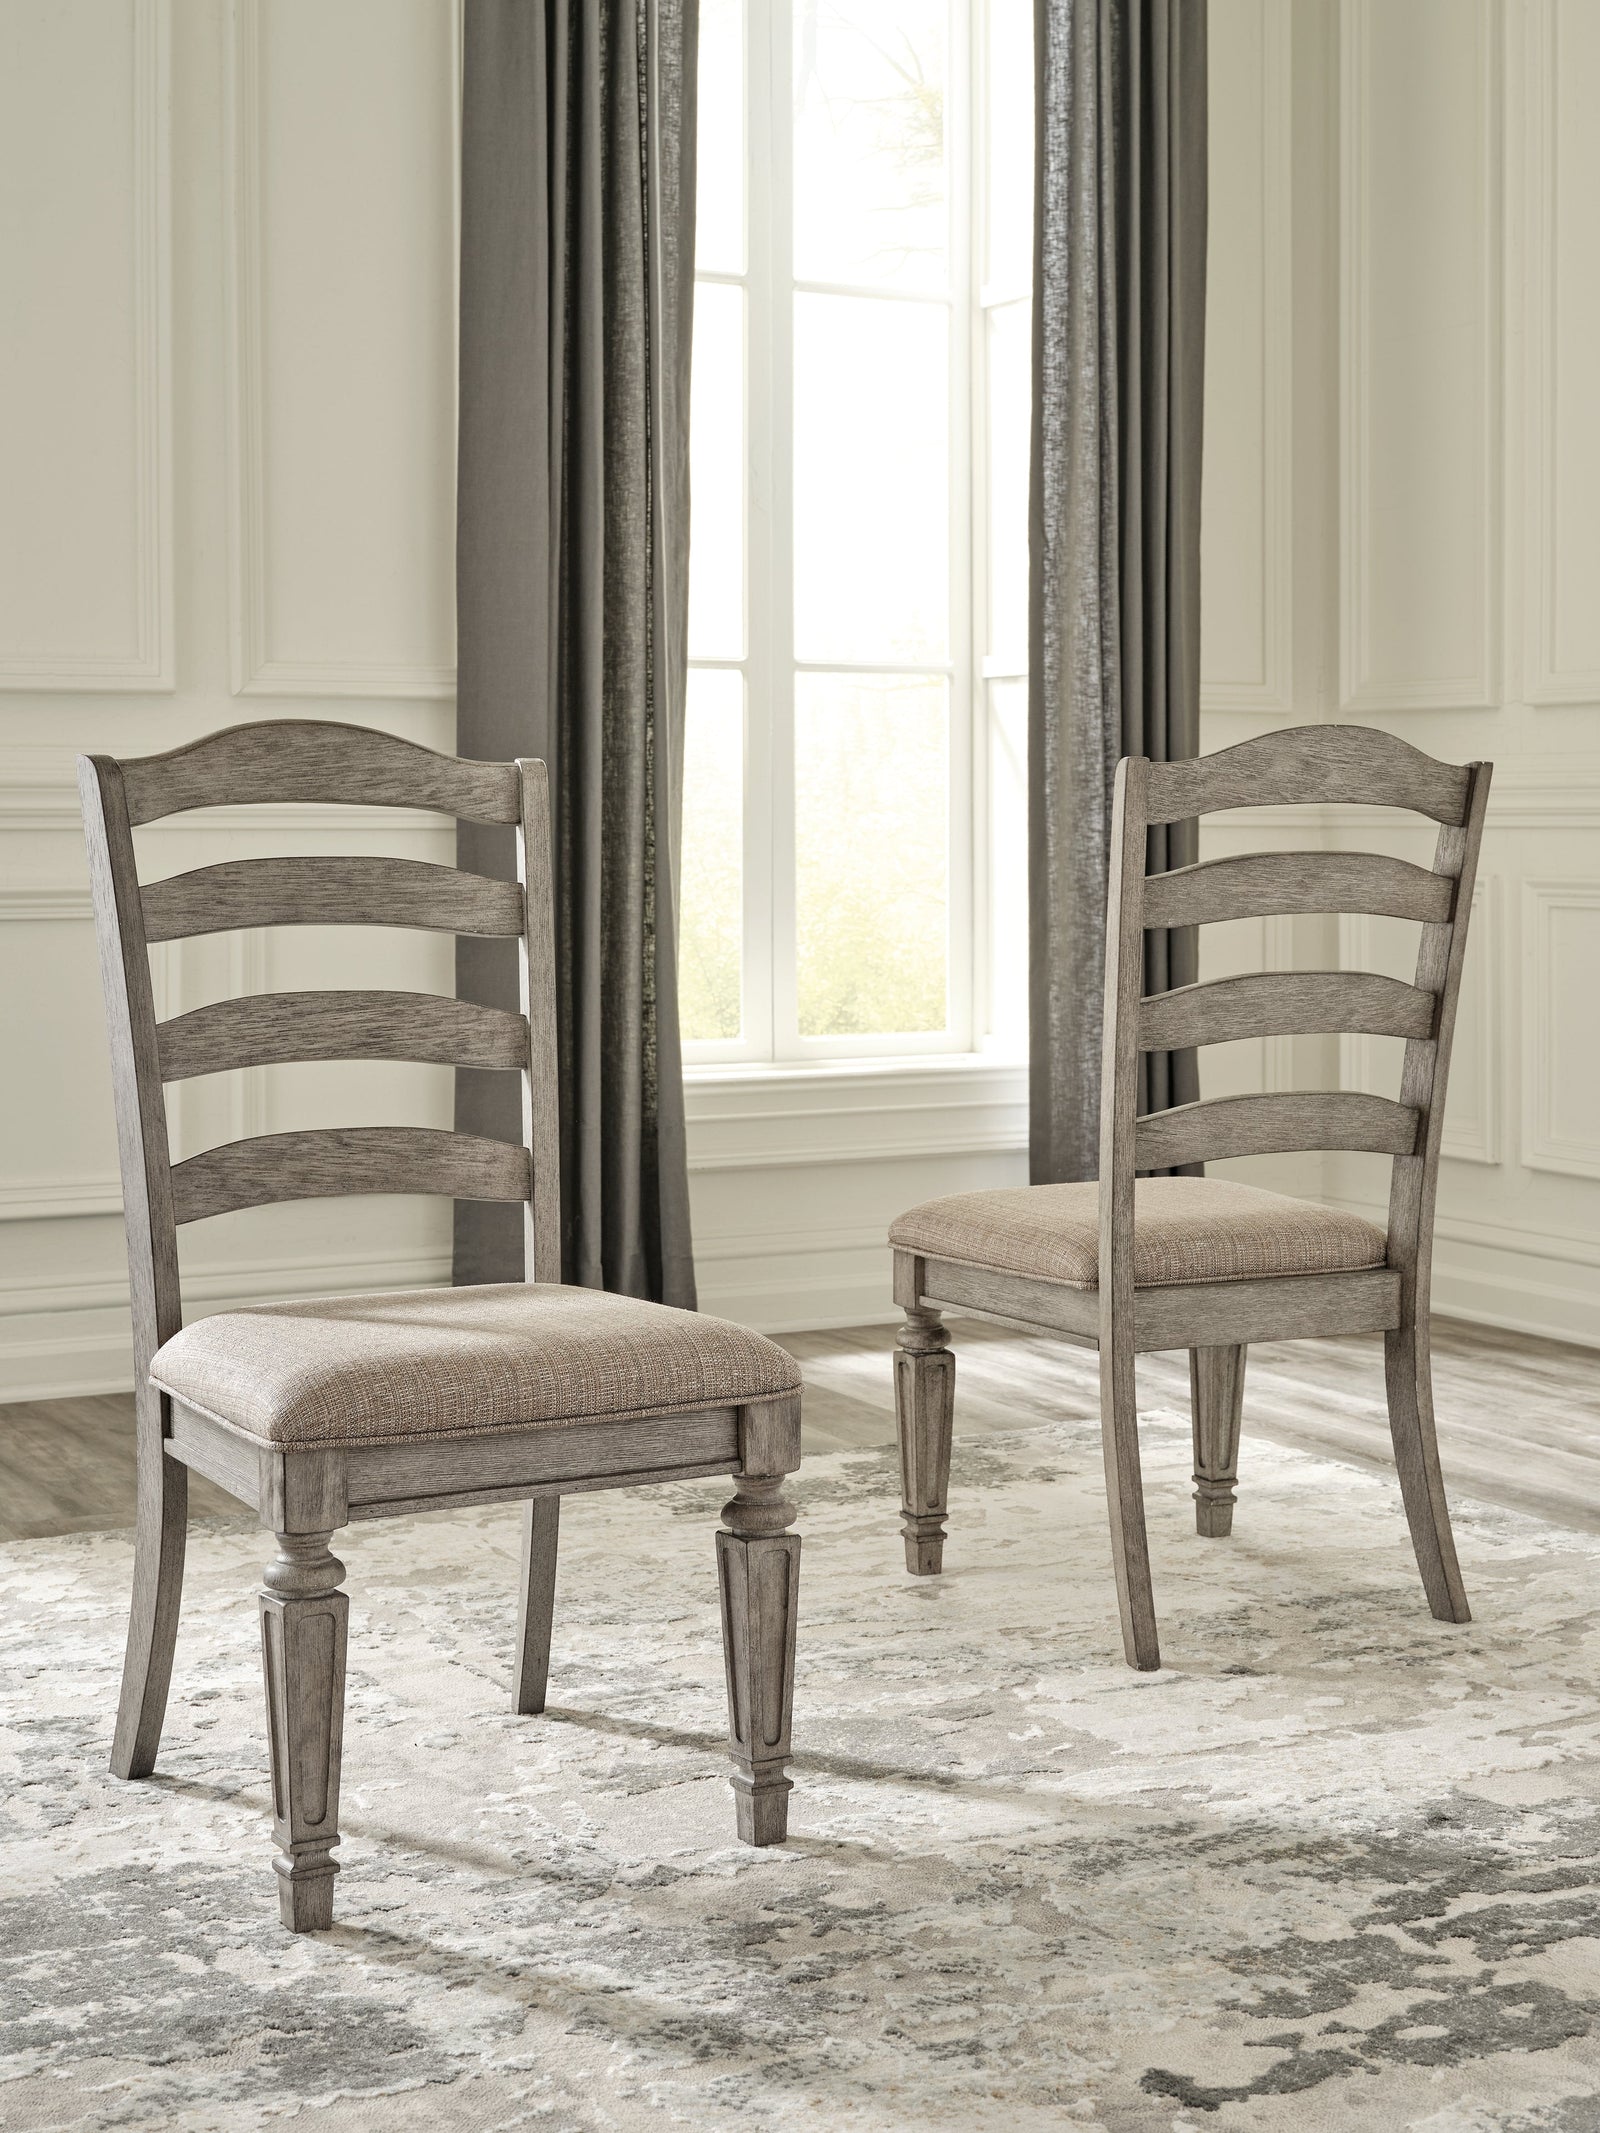 Lodenbay Antique Gray Dining Chair